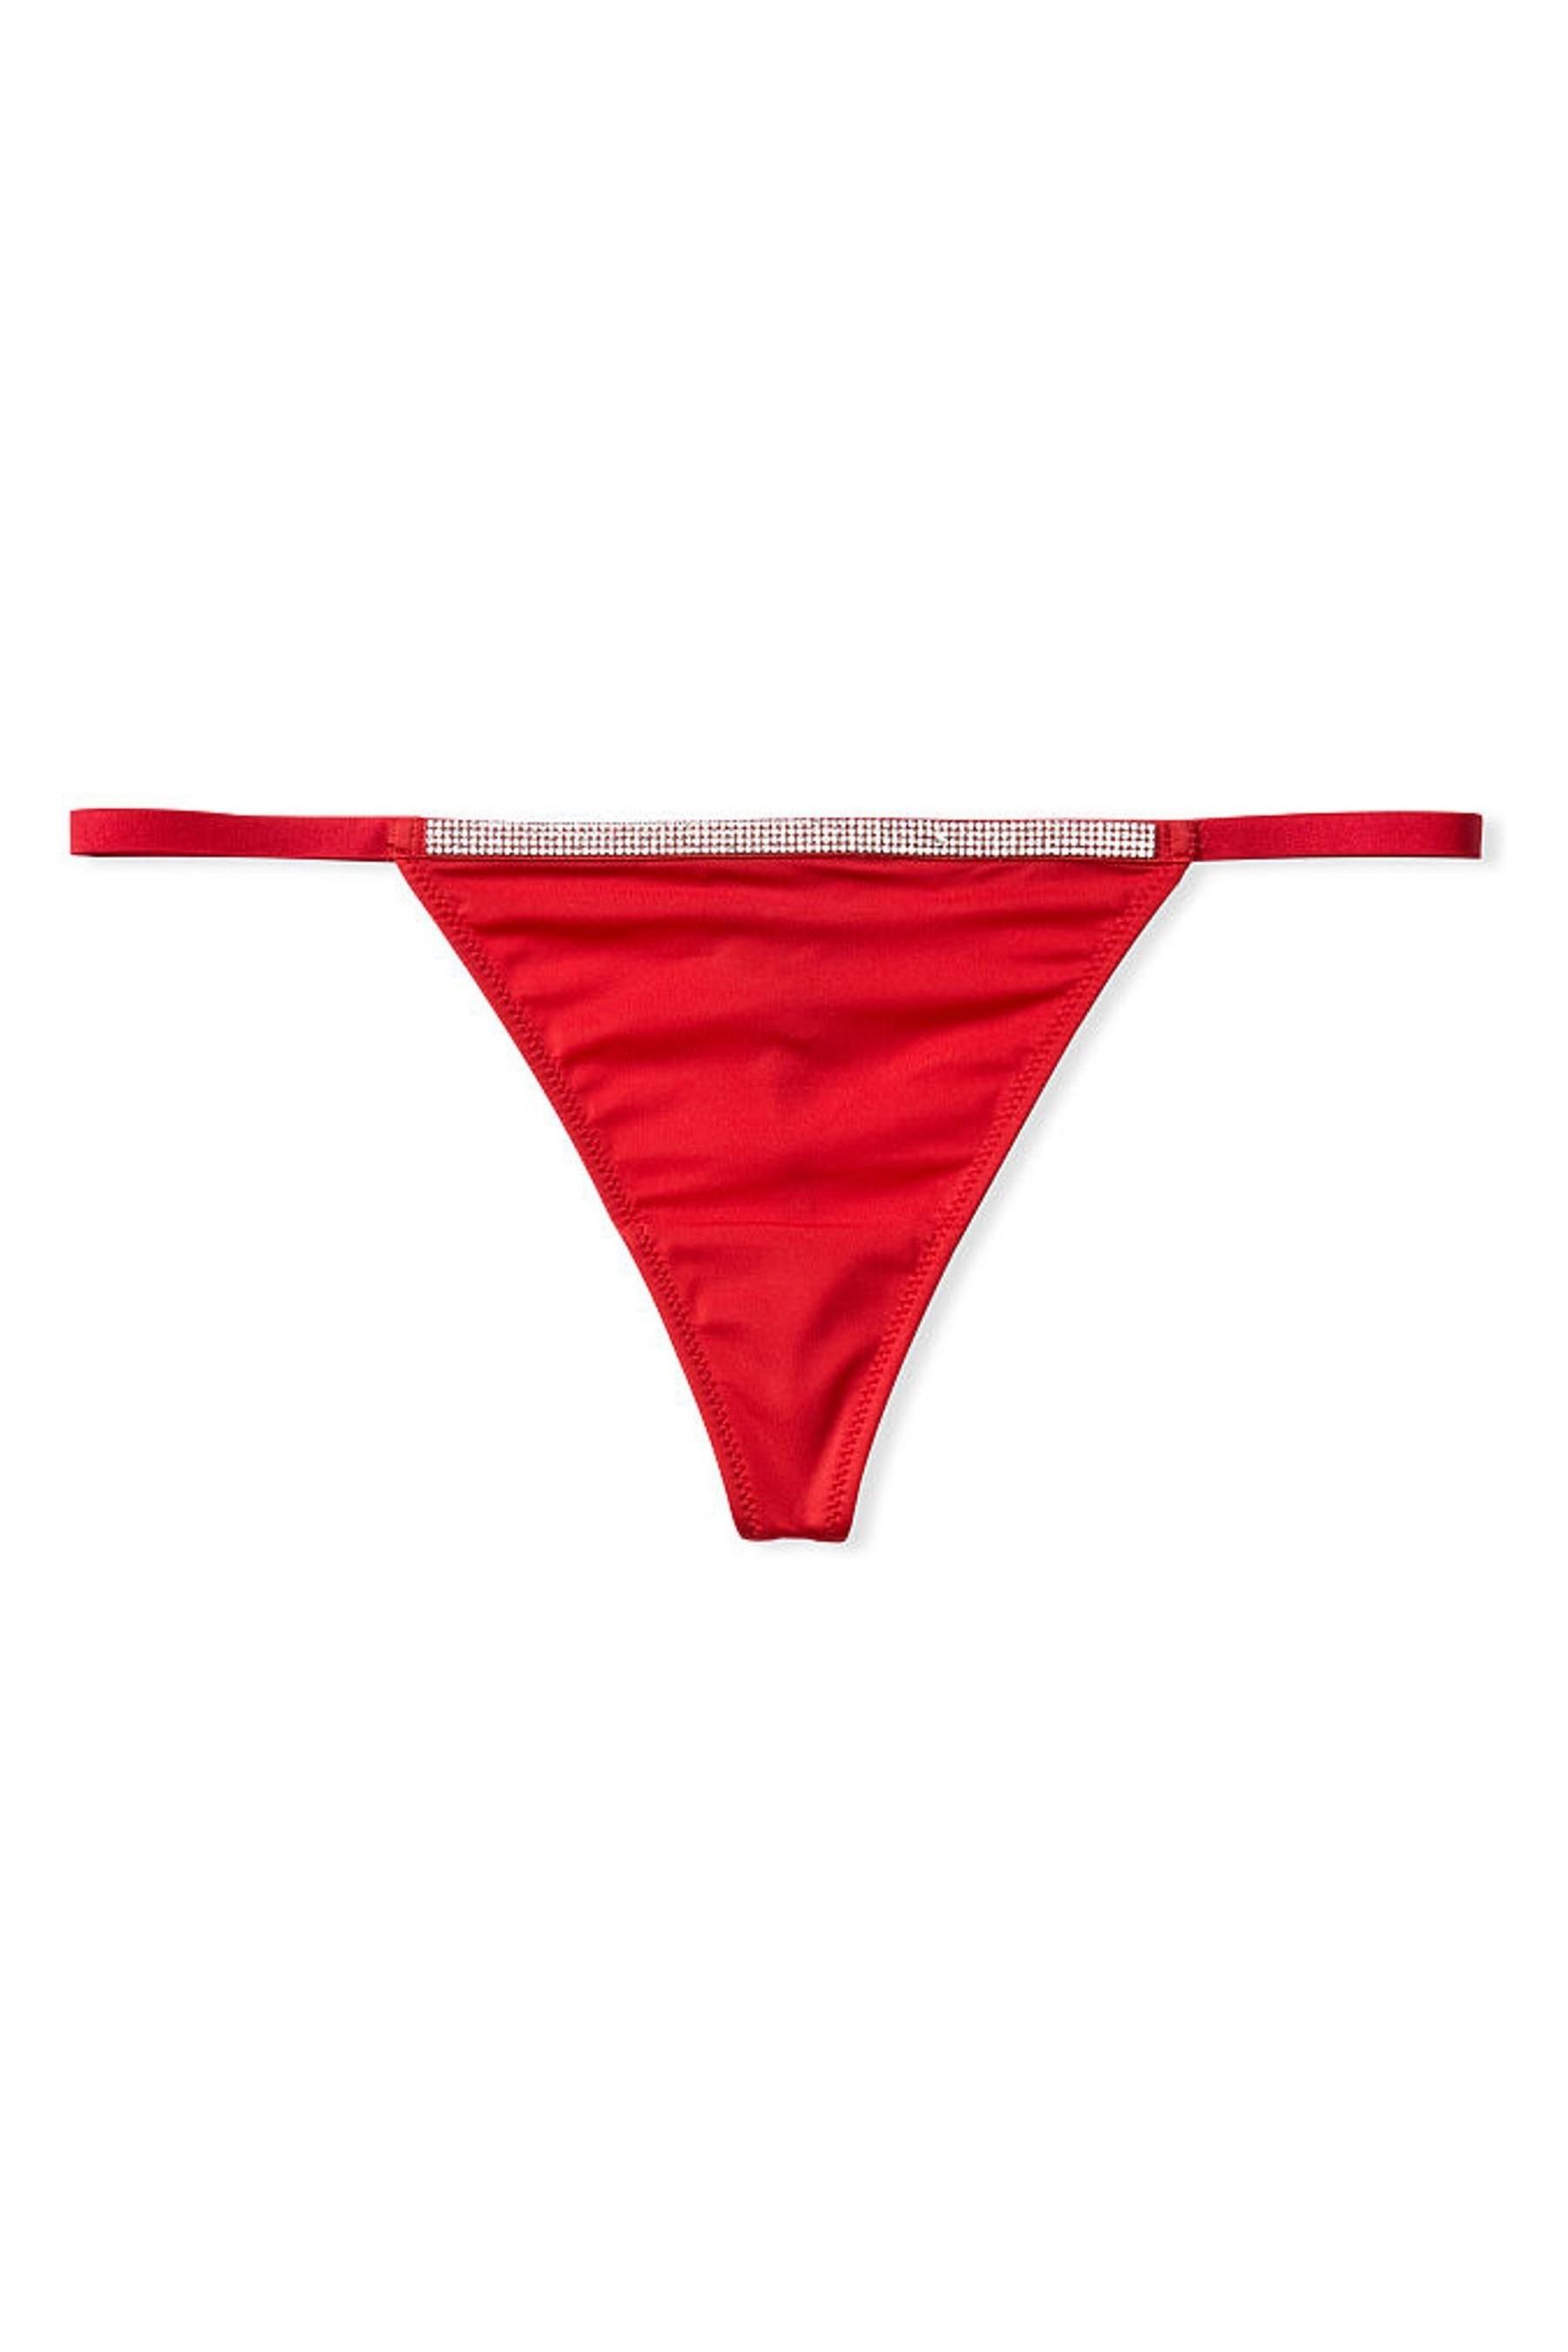 Victoria's Secret Shine G String Knickers in Red | Lyst UK